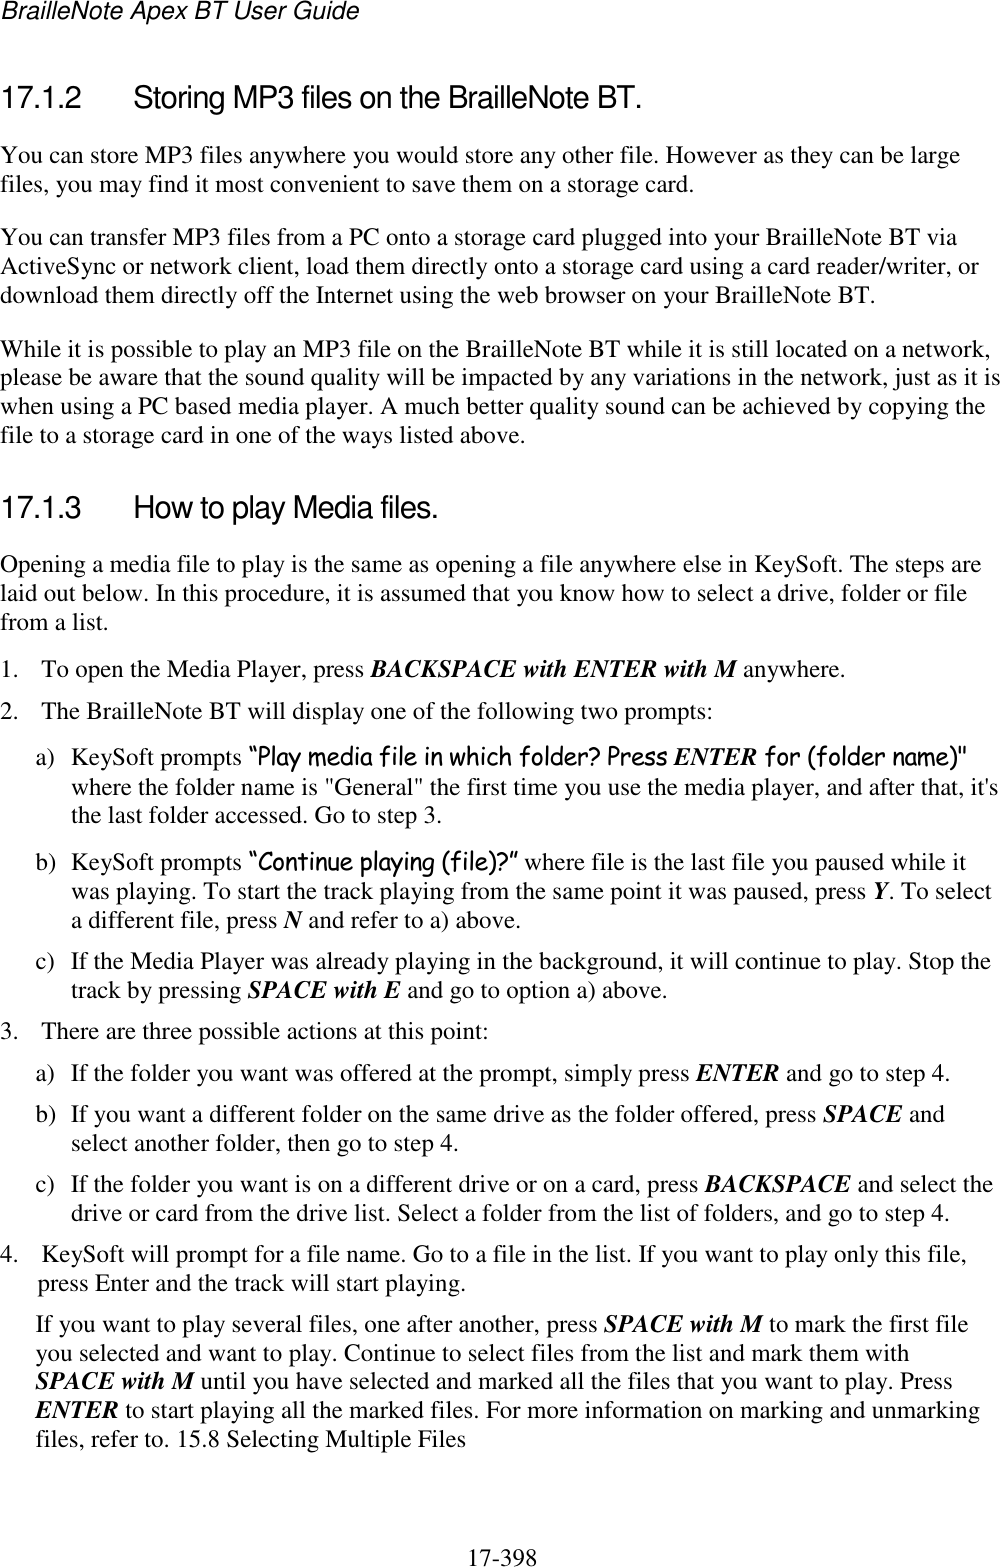 BrailleNote Apex BT User Guide   17-398   17.1.2  Storing MP3 files on the BrailleNote BT. You can store MP3 files anywhere you would store any other file. However as they can be large files, you may find it most convenient to save them on a storage card. You can transfer MP3 files from a PC onto a storage card plugged into your BrailleNote BT via ActiveSync or network client, load them directly onto a storage card using a card reader/writer, or download them directly off the Internet using the web browser on your BrailleNote BT. While it is possible to play an MP3 file on the BrailleNote BT while it is still located on a network, please be aware that the sound quality will be impacted by any variations in the network, just as it is when using a PC based media player. A much better quality sound can be achieved by copying the file to a storage card in one of the ways listed above.  17.1.3  How to play Media files. Opening a media file to play is the same as opening a file anywhere else in KeySoft. The steps are laid out below. In this procedure, it is assumed that you know how to select a drive, folder or file from a list. 1. To open the Media Player, press BACKSPACE with ENTER with M anywhere. 2. The BrailleNote BT will display one of the following two prompts: a) KeySoft prompts “Play media file in which folder? Press ENTER for (folder name)&quot; where the folder name is &quot;General&quot; the first time you use the media player, and after that, it&apos;s the last folder accessed. Go to step 3. b) KeySoft prompts “Continue playing (file)?” where file is the last file you paused while it was playing. To start the track playing from the same point it was paused, press Y. To select a different file, press N and refer to a) above. c) If the Media Player was already playing in the background, it will continue to play. Stop the track by pressing SPACE with E and go to option a) above. 3. There are three possible actions at this point: a) If the folder you want was offered at the prompt, simply press ENTER and go to step 4. b) If you want a different folder on the same drive as the folder offered, press SPACE and select another folder, then go to step 4. c) If the folder you want is on a different drive or on a card, press BACKSPACE and select the drive or card from the drive list. Select a folder from the list of folders, and go to step 4. 4. KeySoft will prompt for a file name. Go to a file in the list. If you want to play only this file, press Enter and the track will start playing.  If you want to play several files, one after another, press SPACE with M to mark the first file you selected and want to play. Continue to select files from the list and mark them with SPACE with M until you have selected and marked all the files that you want to play. Press ENTER to start playing all the marked files. For more information on marking and unmarking files, refer to. 15.8 Selecting Multiple Files 